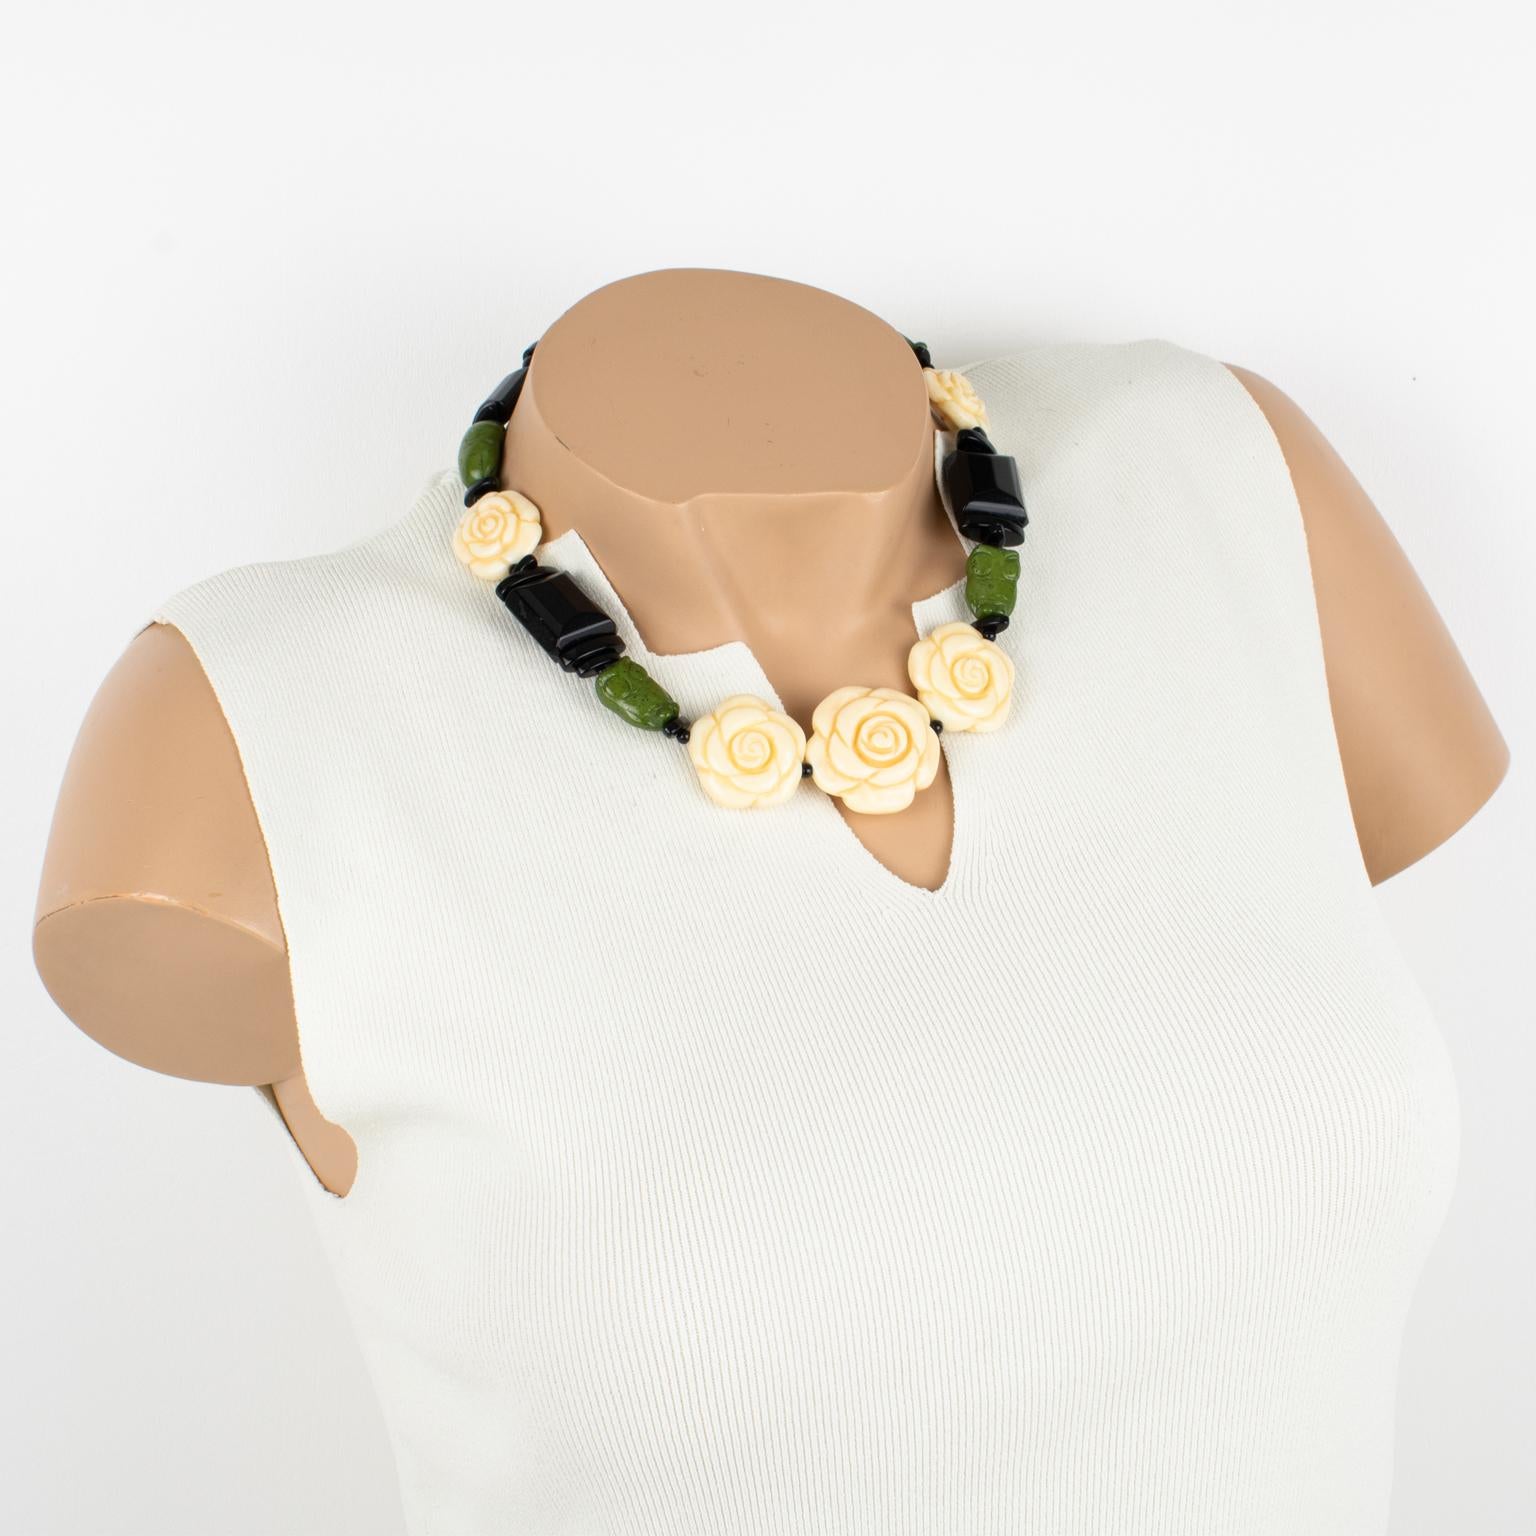 Angela Caputi designed this lovely resin choker necklace. This necklace features carved beads with flower and owl shapes and geometric pebble elements. The choker boasts black with green colors and ivory-like color contrast. Her color combination is